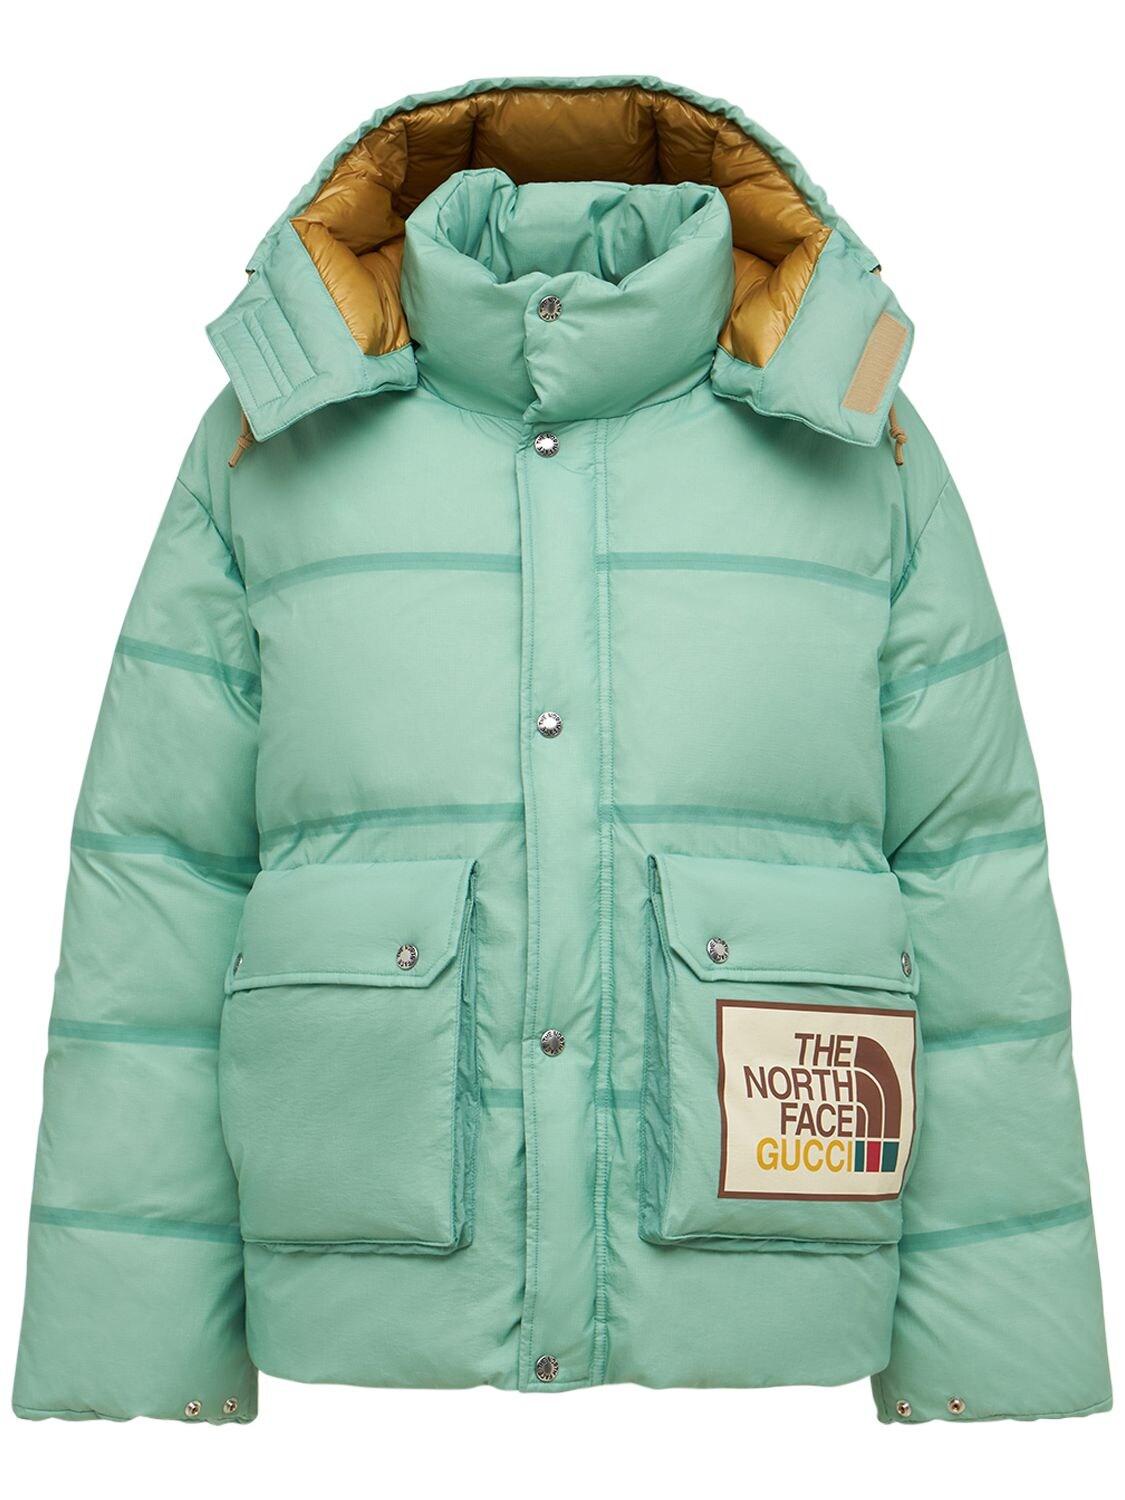 Gucci X The North Face Down Bomber Jacket in Green | Lyst